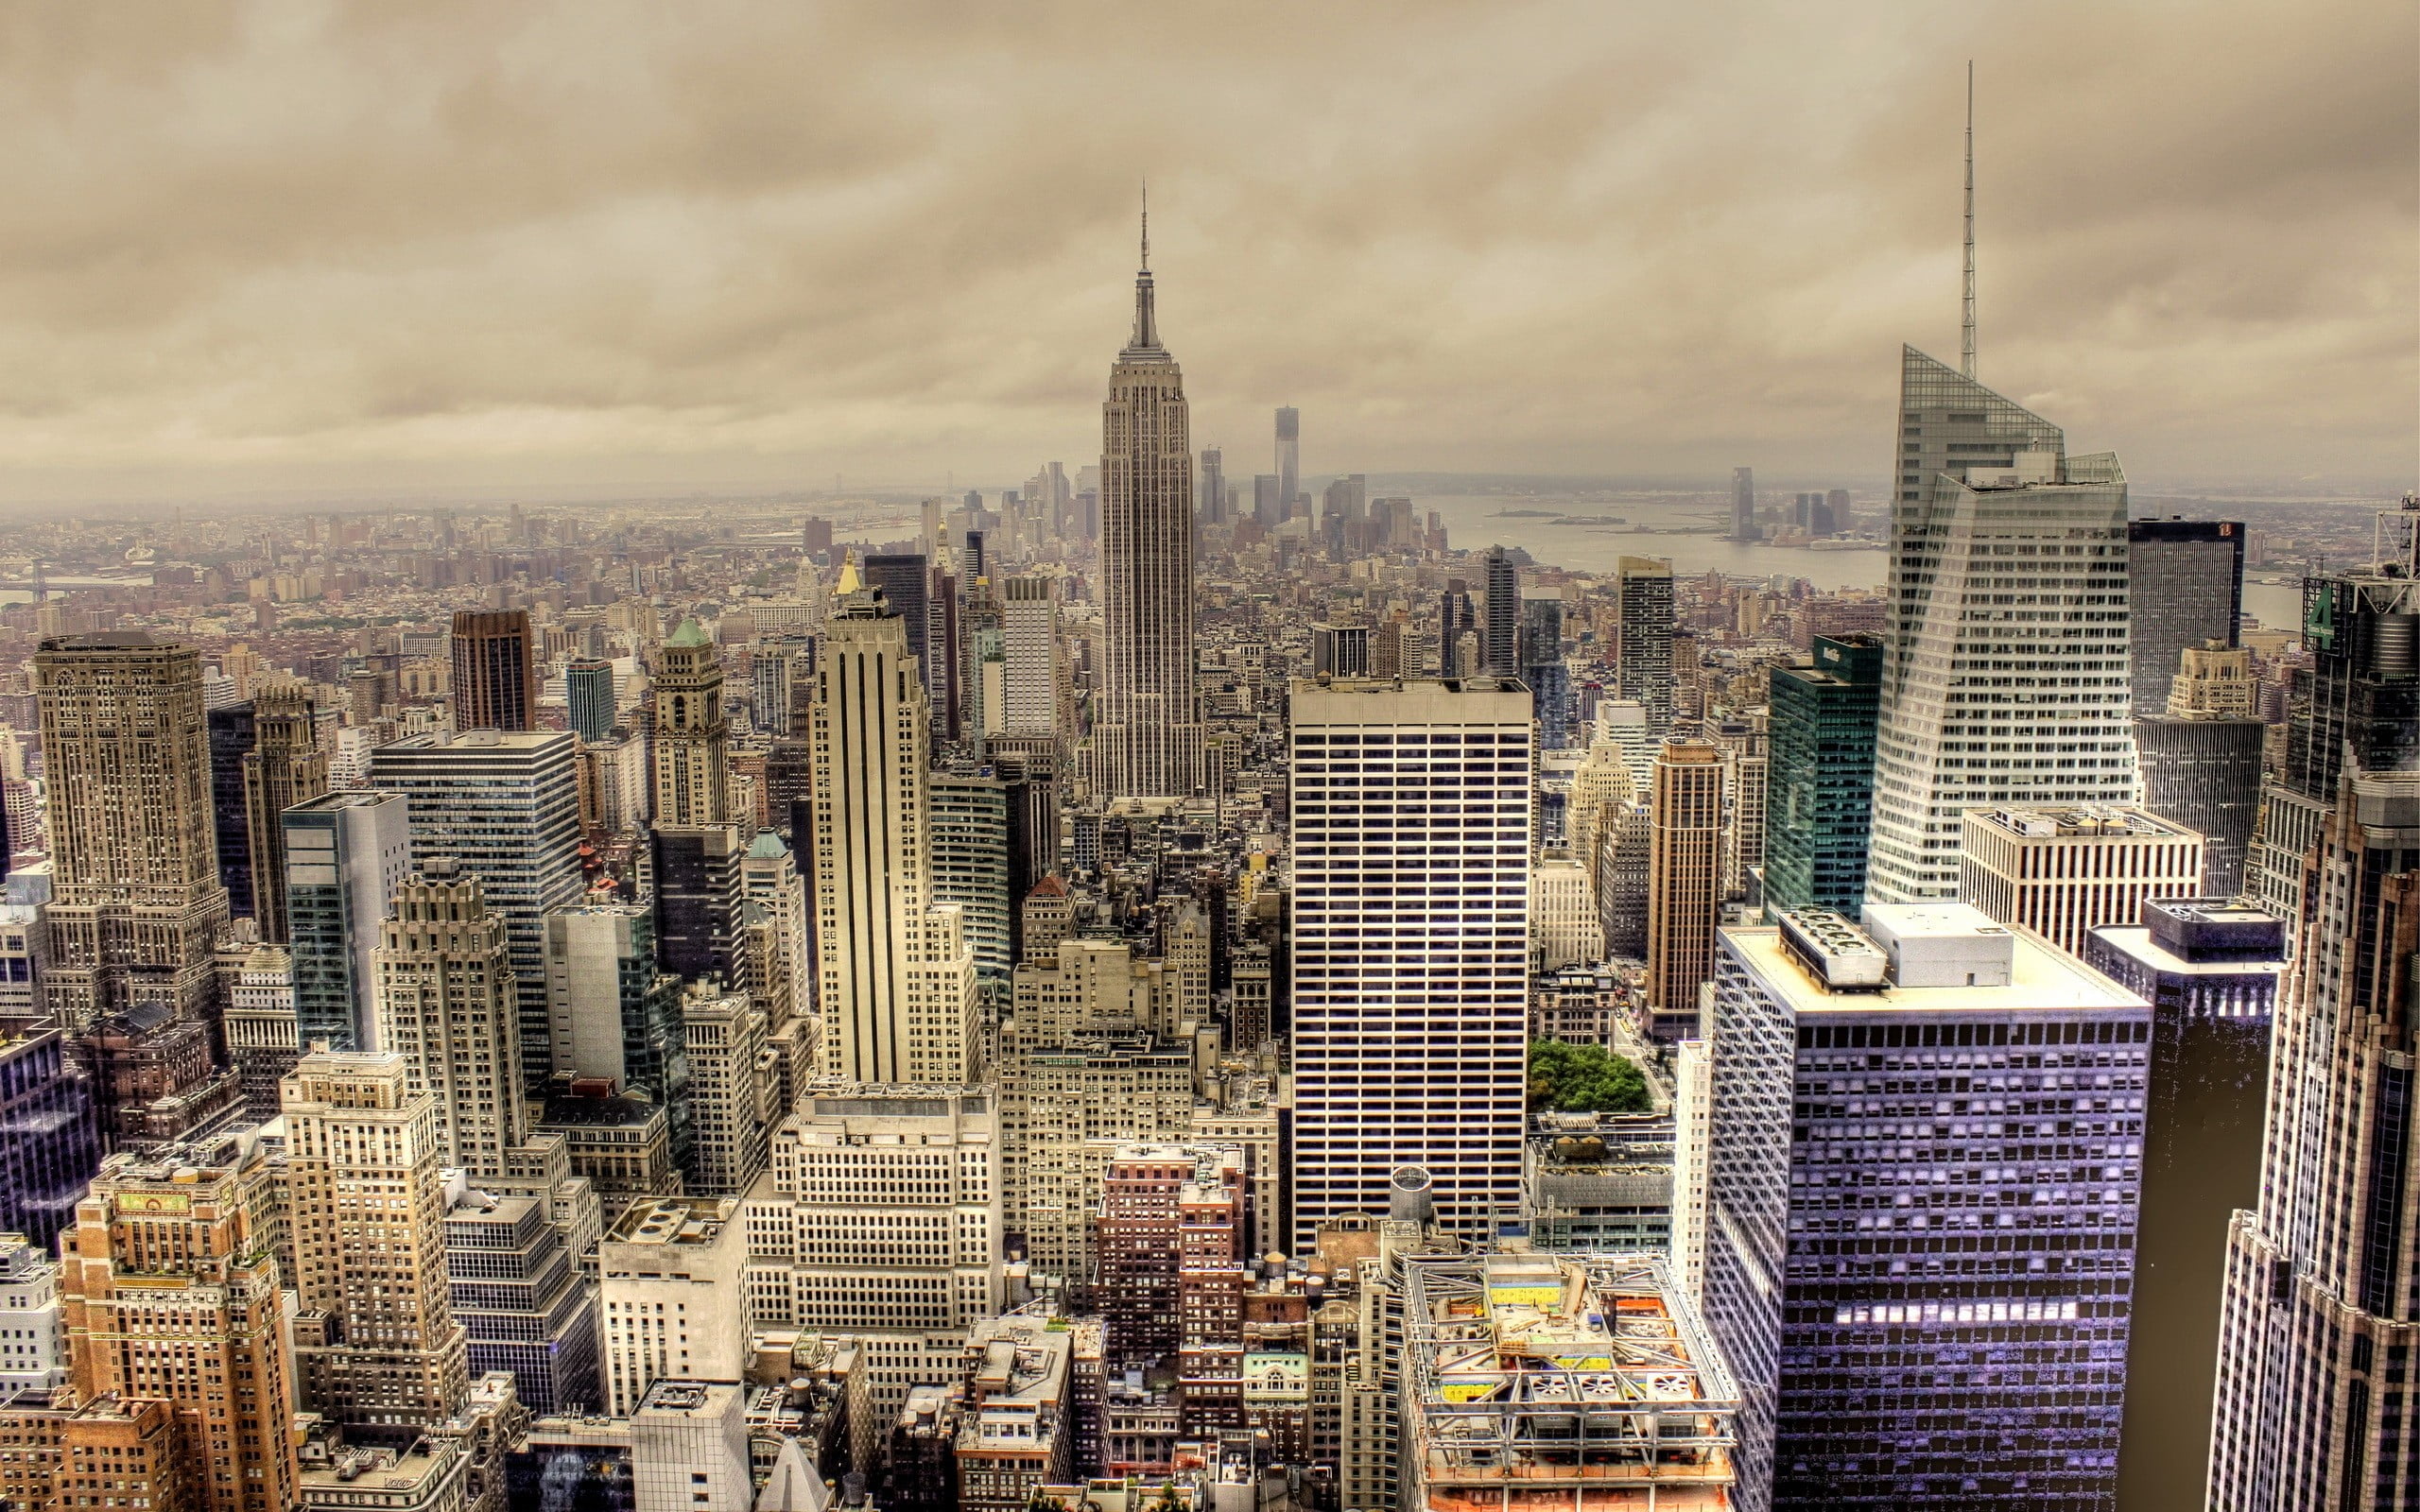 Empire State Building, cityscape, HDR, building, New York City